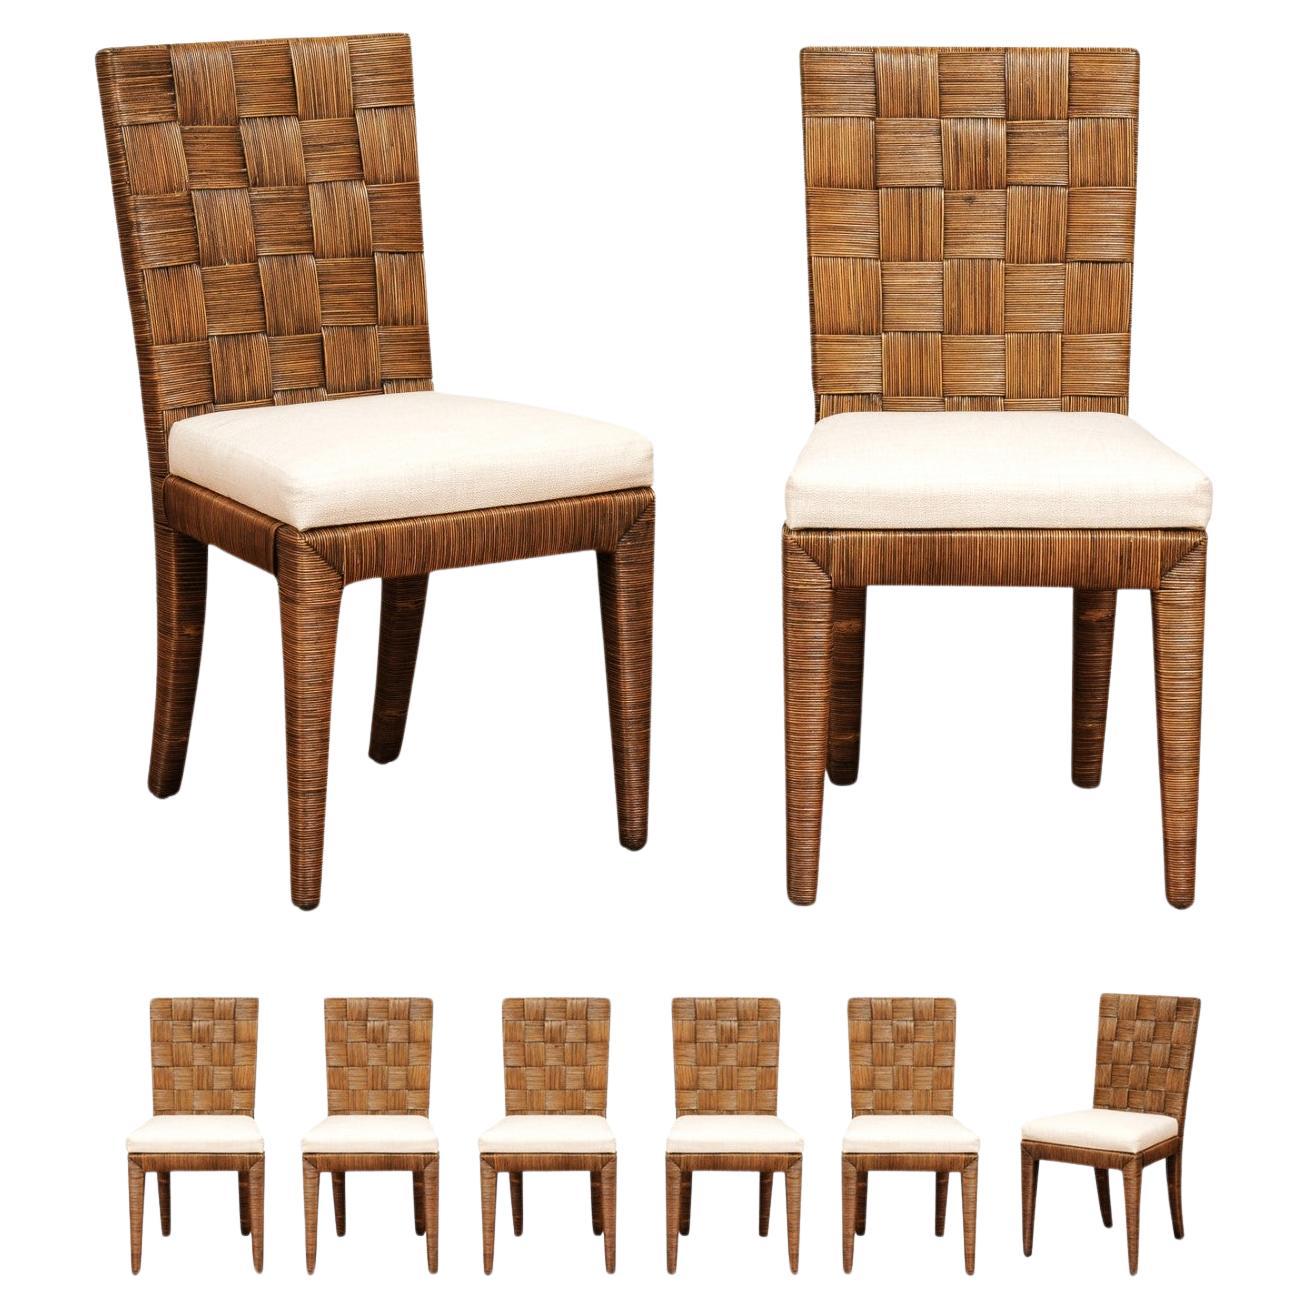 Stellar Restored Set of 8 Block Island Cane Chairs by John Hutton for Donghia For Sale